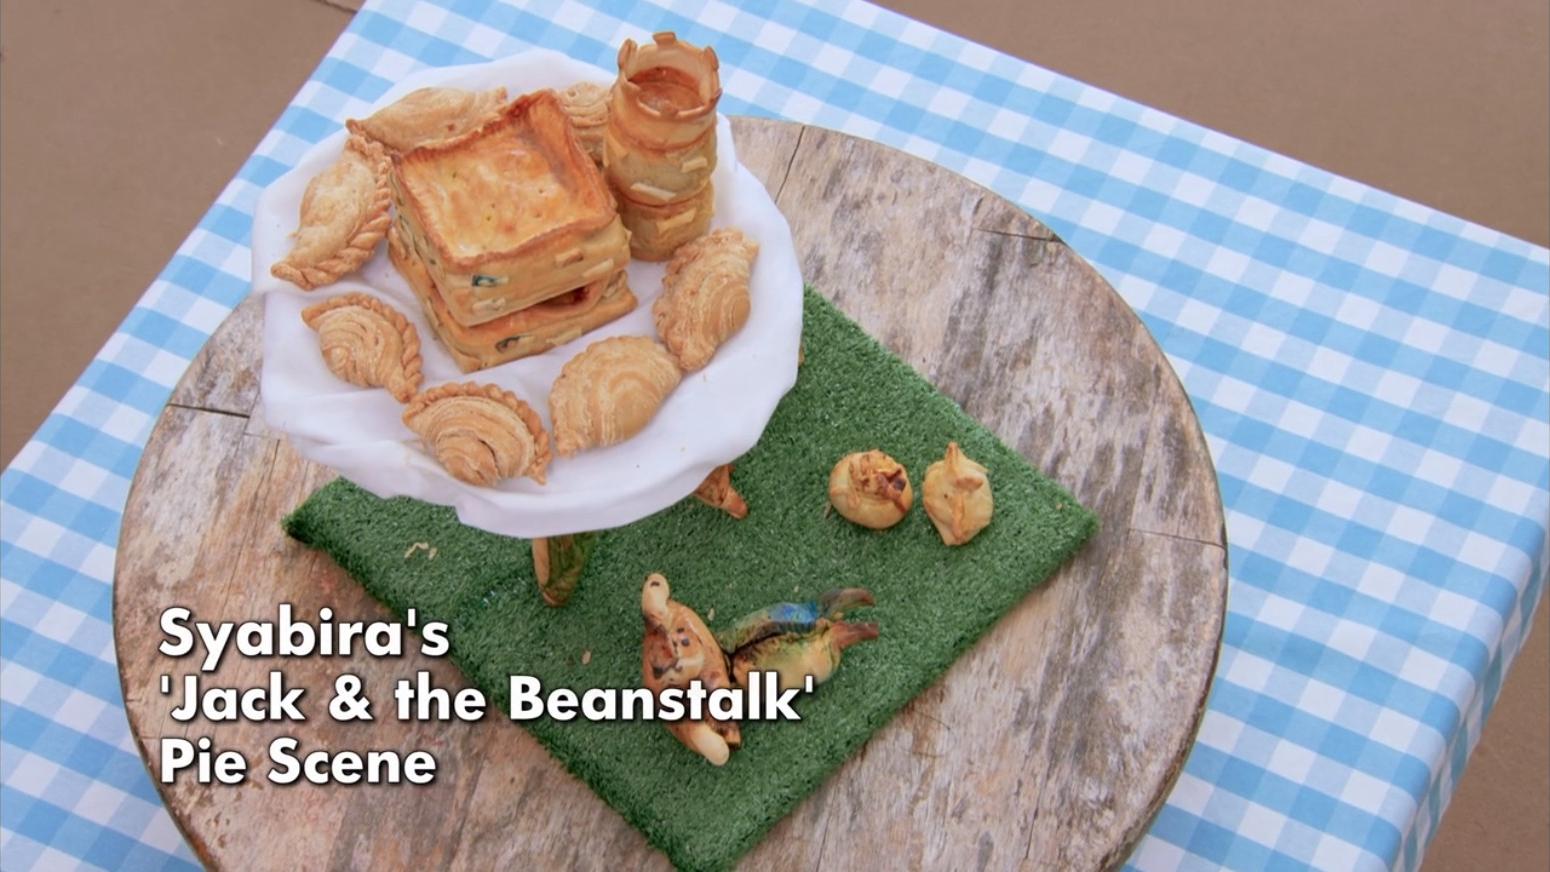 Picture shows: Syabira's Jack and the Beanstalk Showstopper from The Great British Baking Show Collection 10's Pastry Week